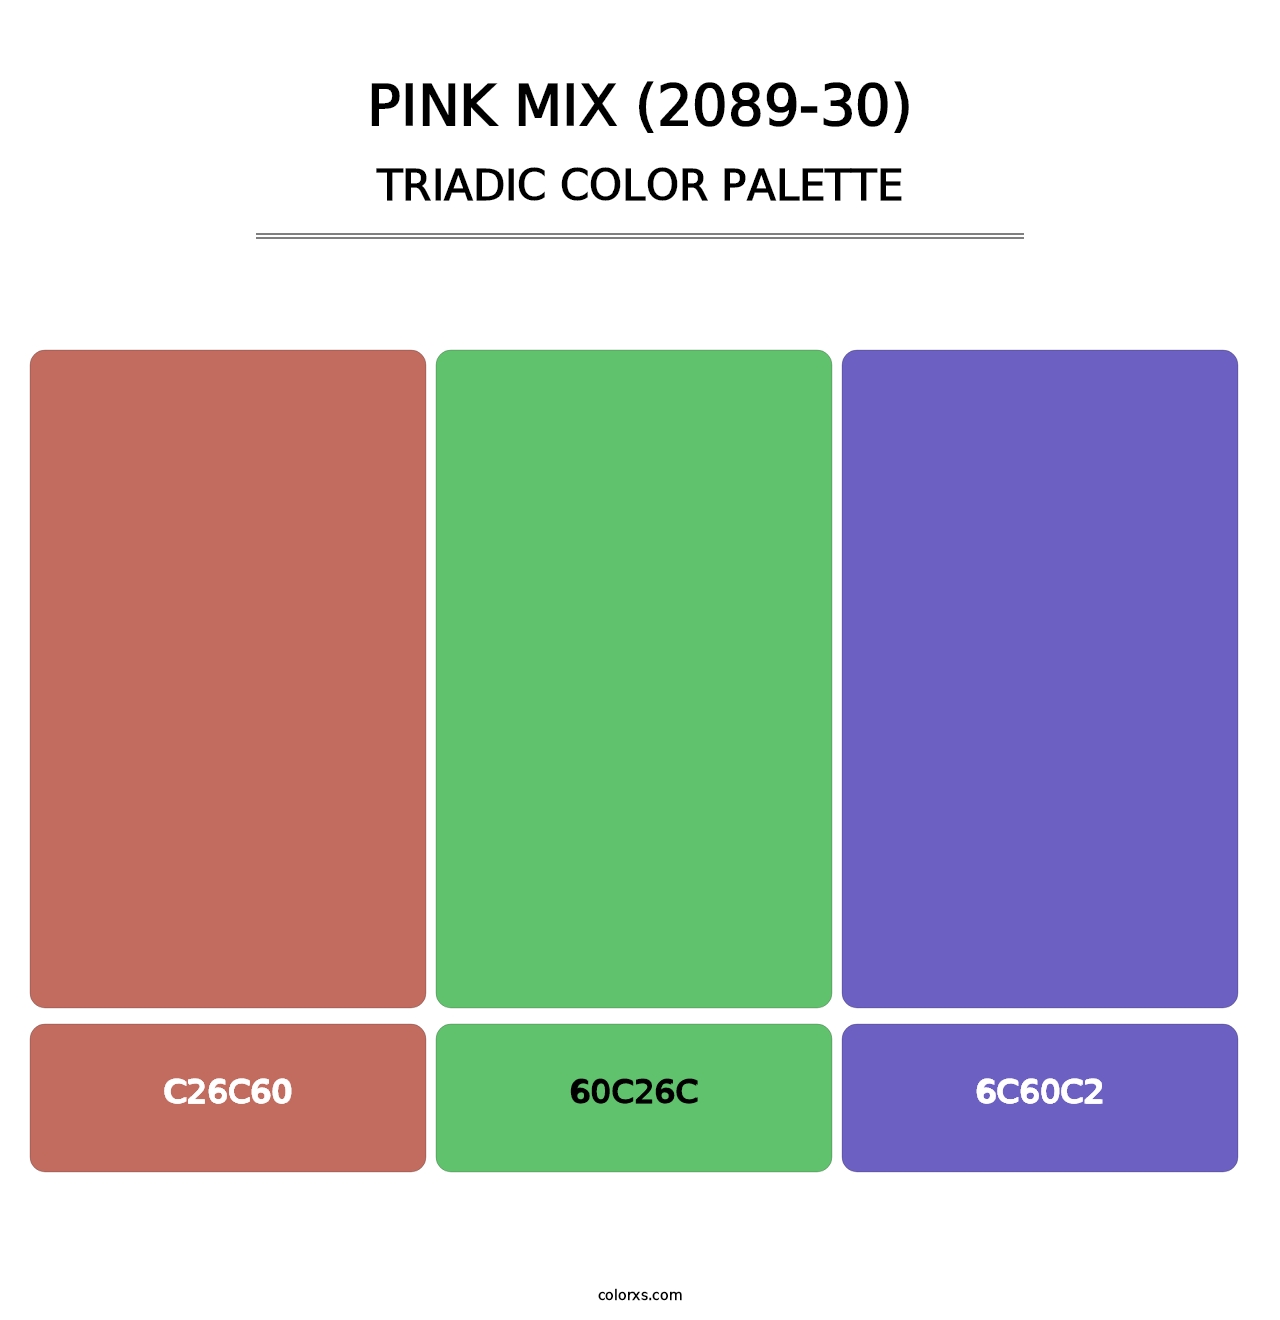 Pink Mix (2089-30) - Triadic Color Palette